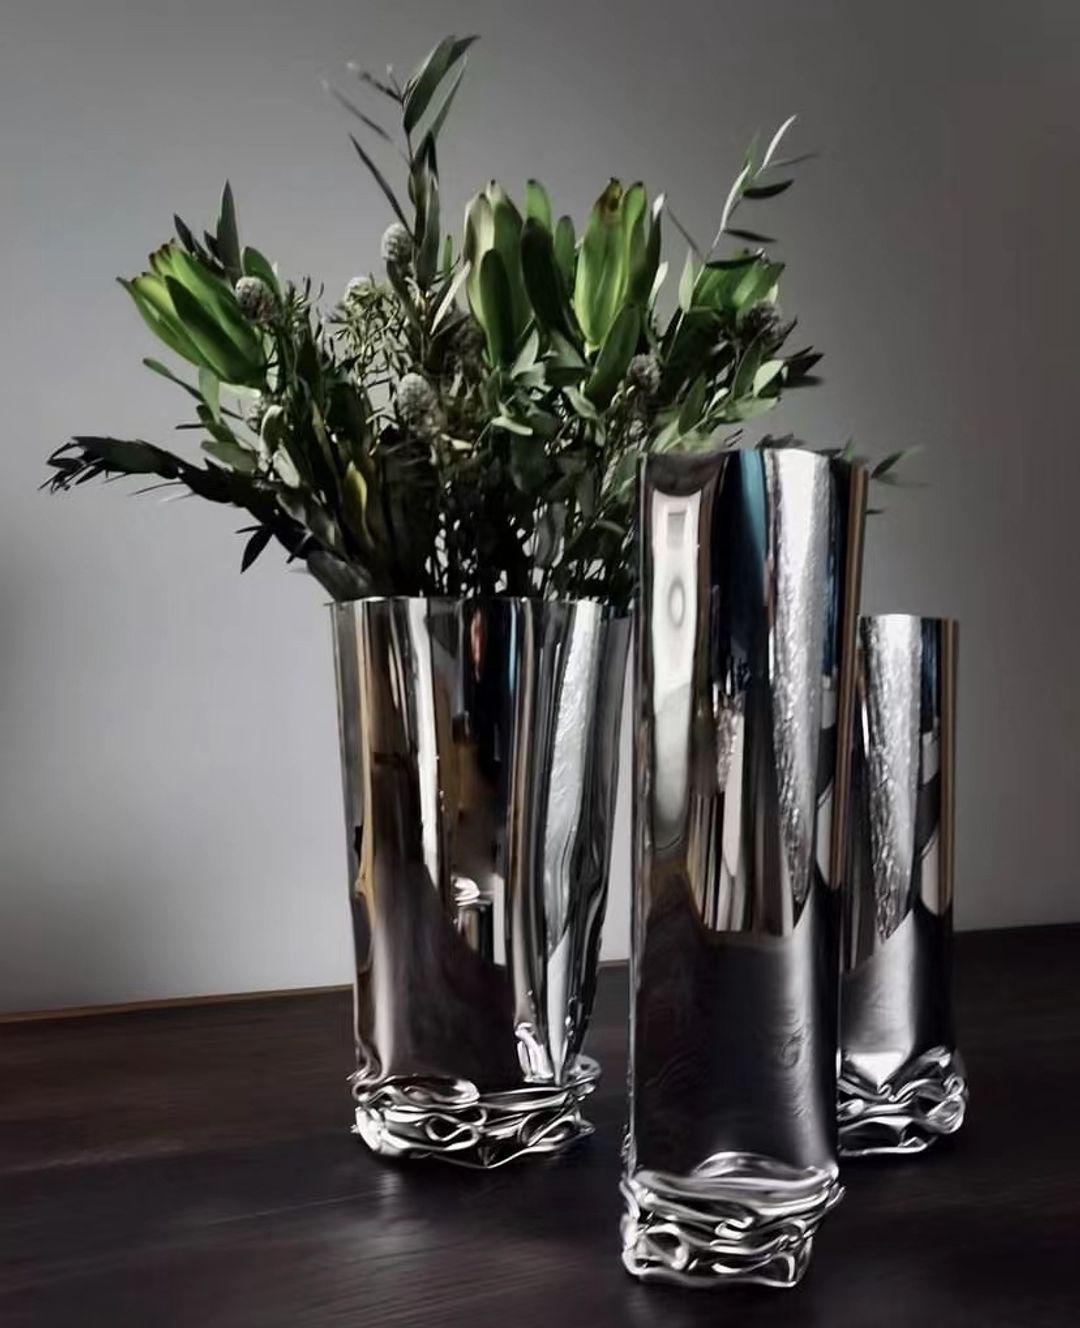 Oskar Zieta presents his latest works at the HE Concept Store and in the hotel’s passage. Modern, minimalist and often formally experimental vases will form part of the hotel’s elegant interiors. Measure: H 35 cm.
 
Shiny steel reflecting the